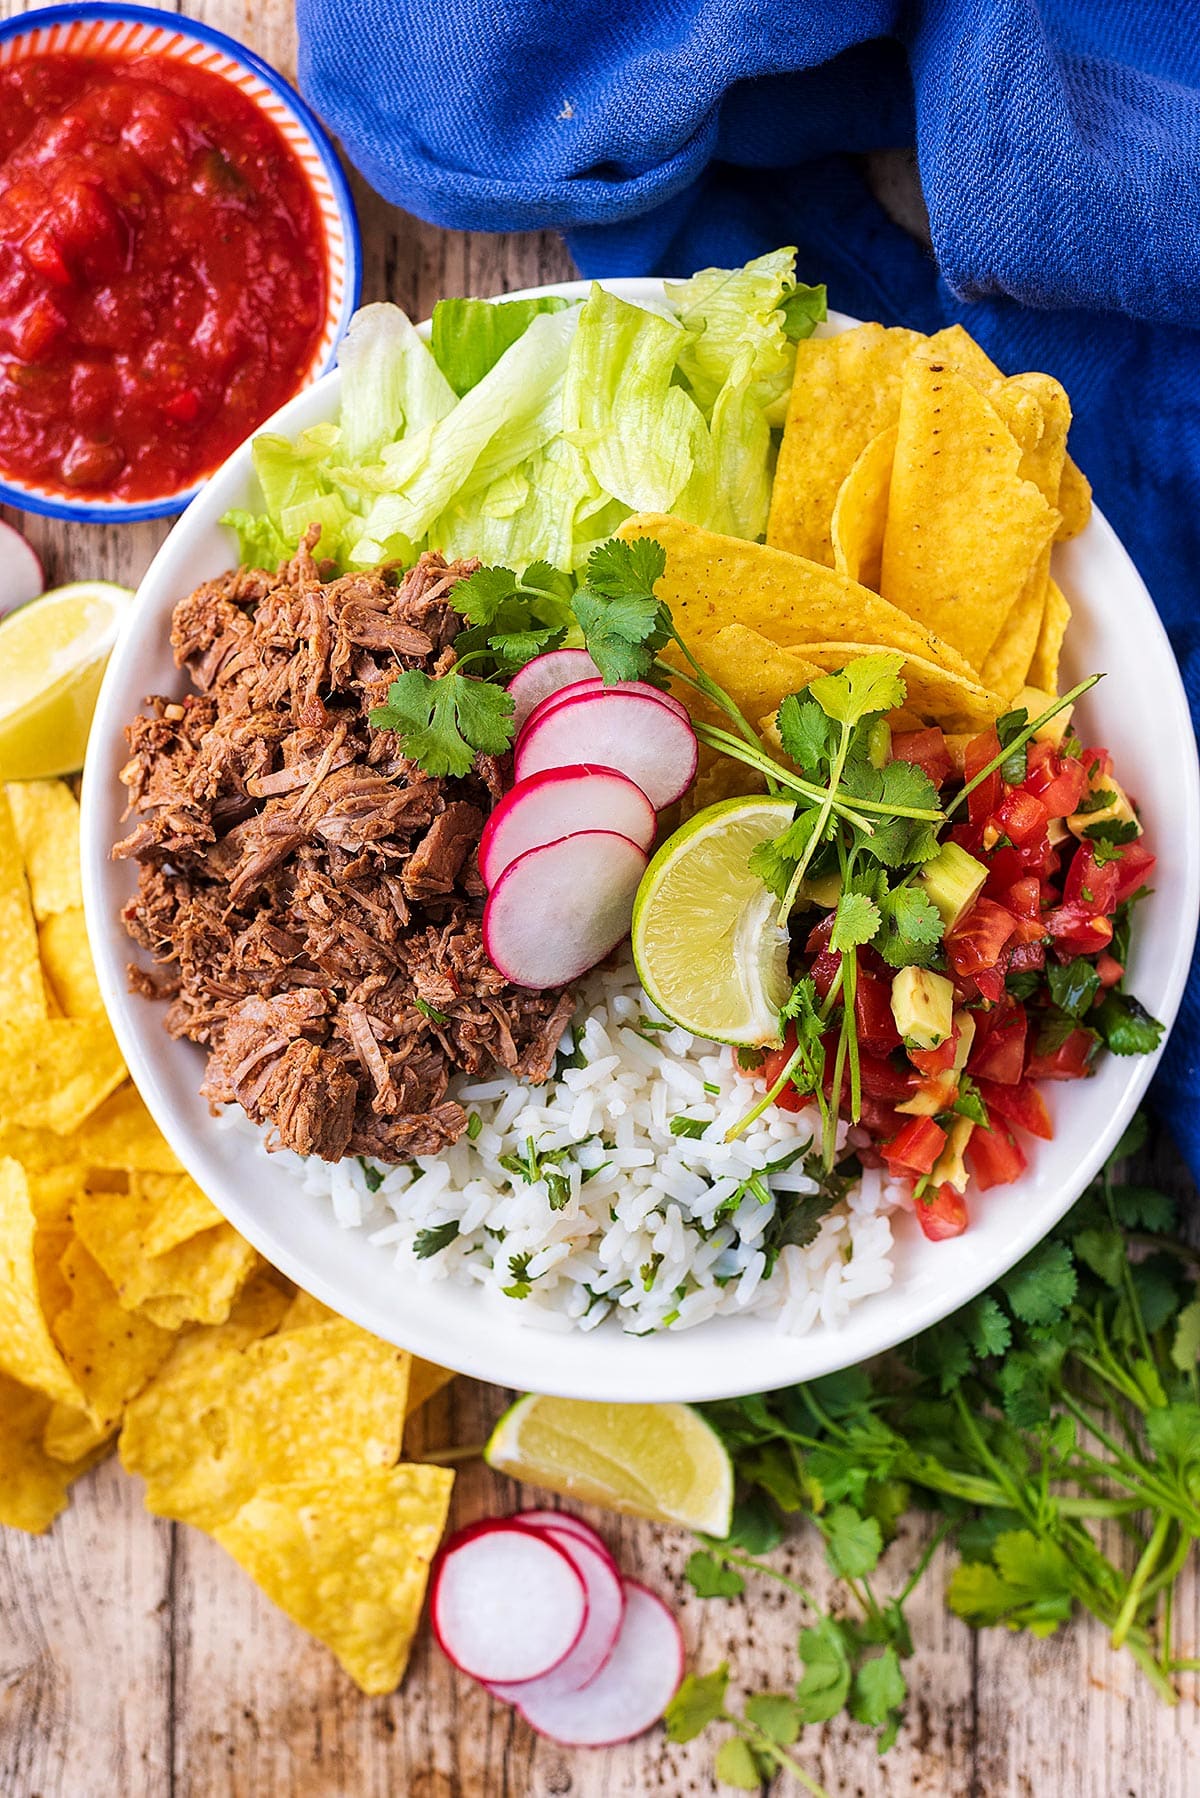 A burrito bowl consisting of shredded beef, lettuce, salsa, rice, tortilla chips and sliced radish.